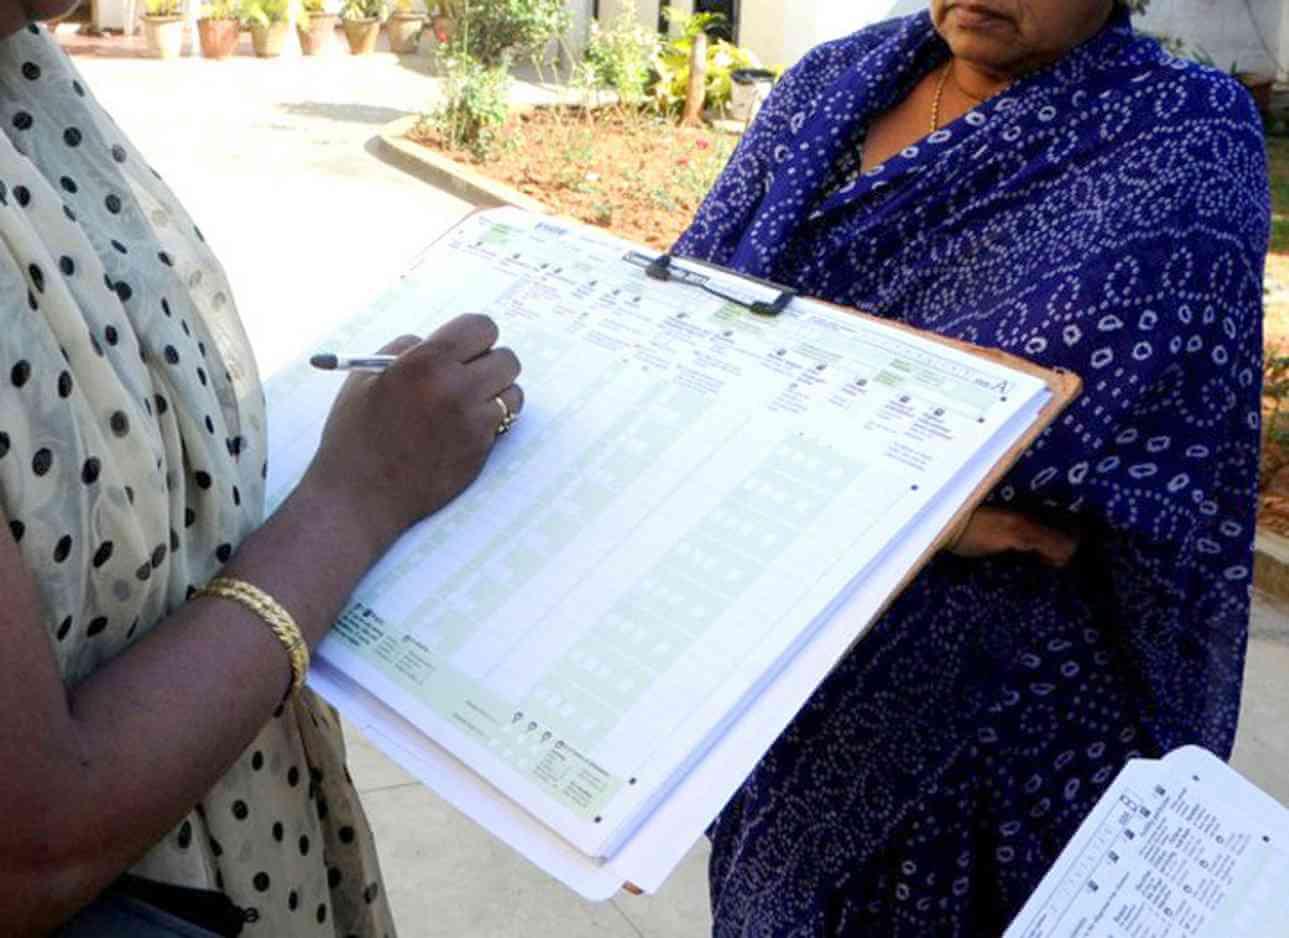 Census being conducted